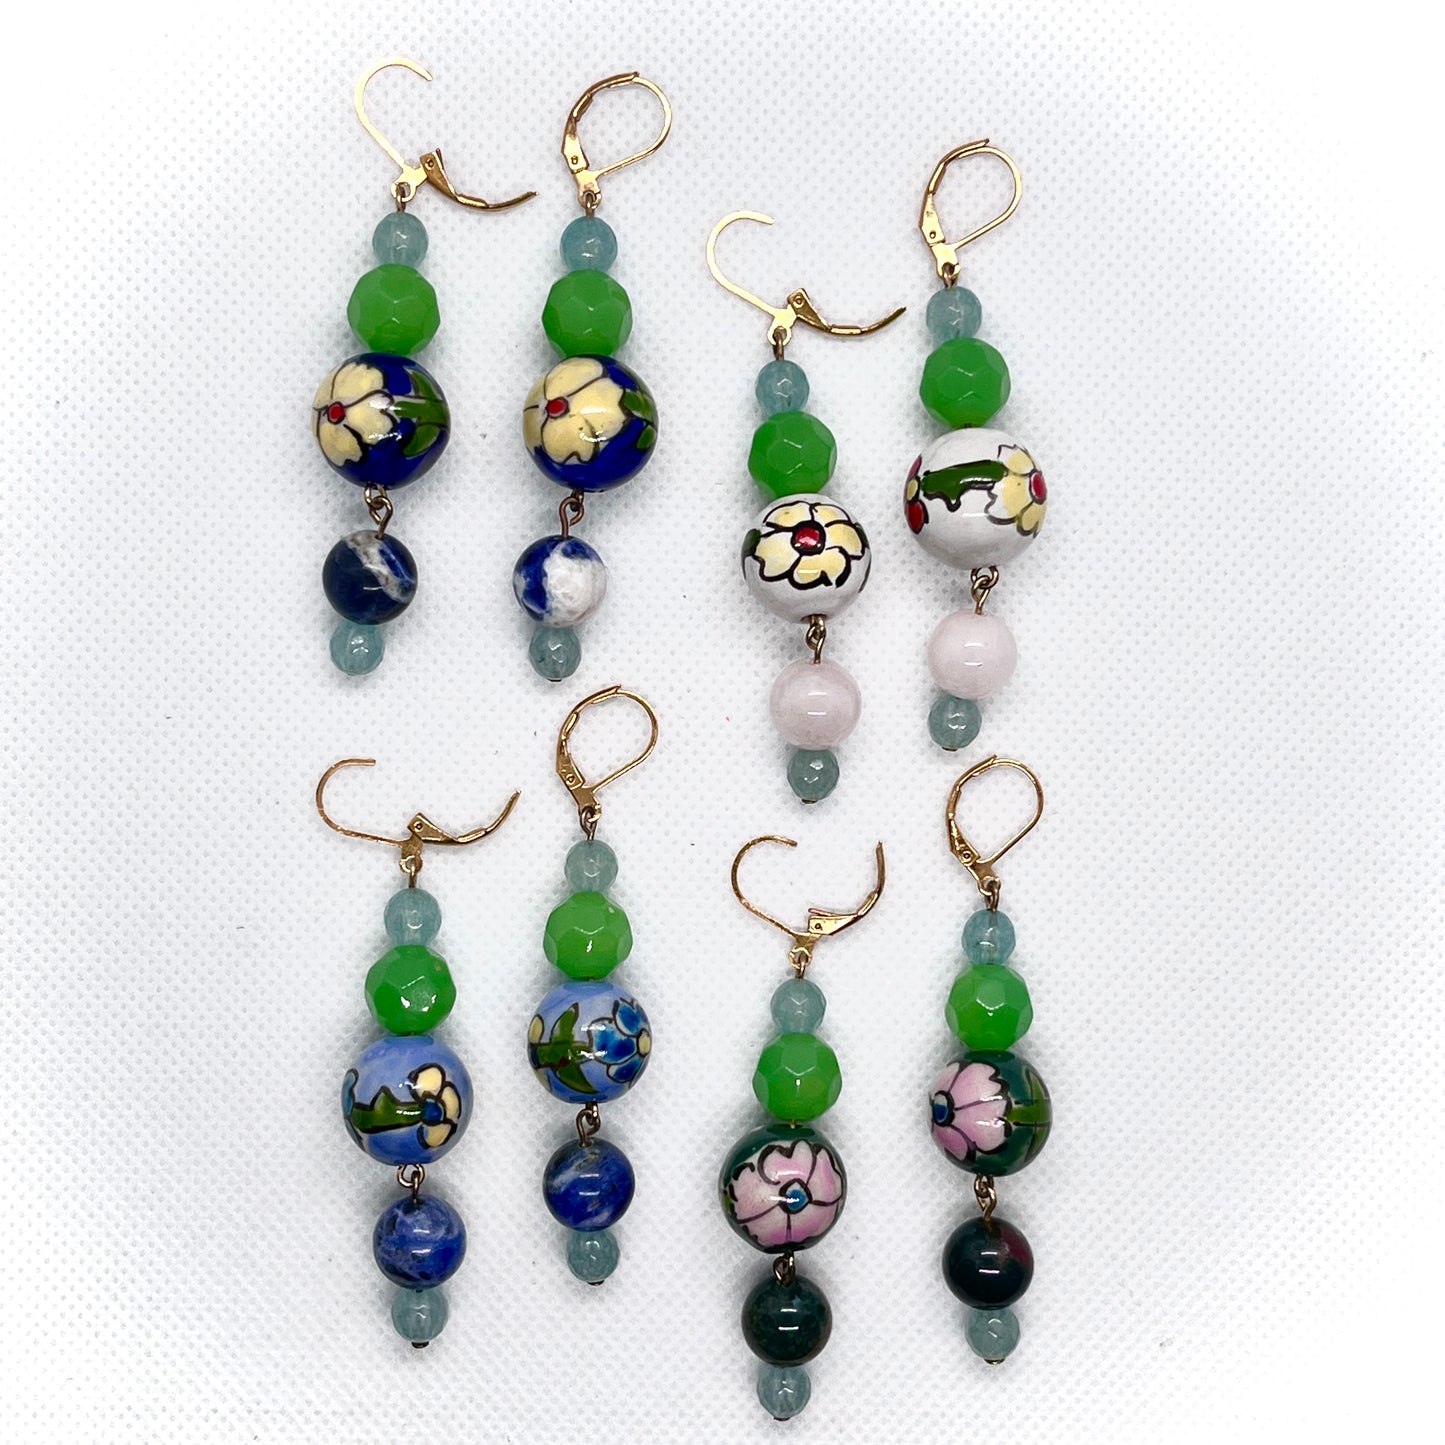 Painted China Earrings